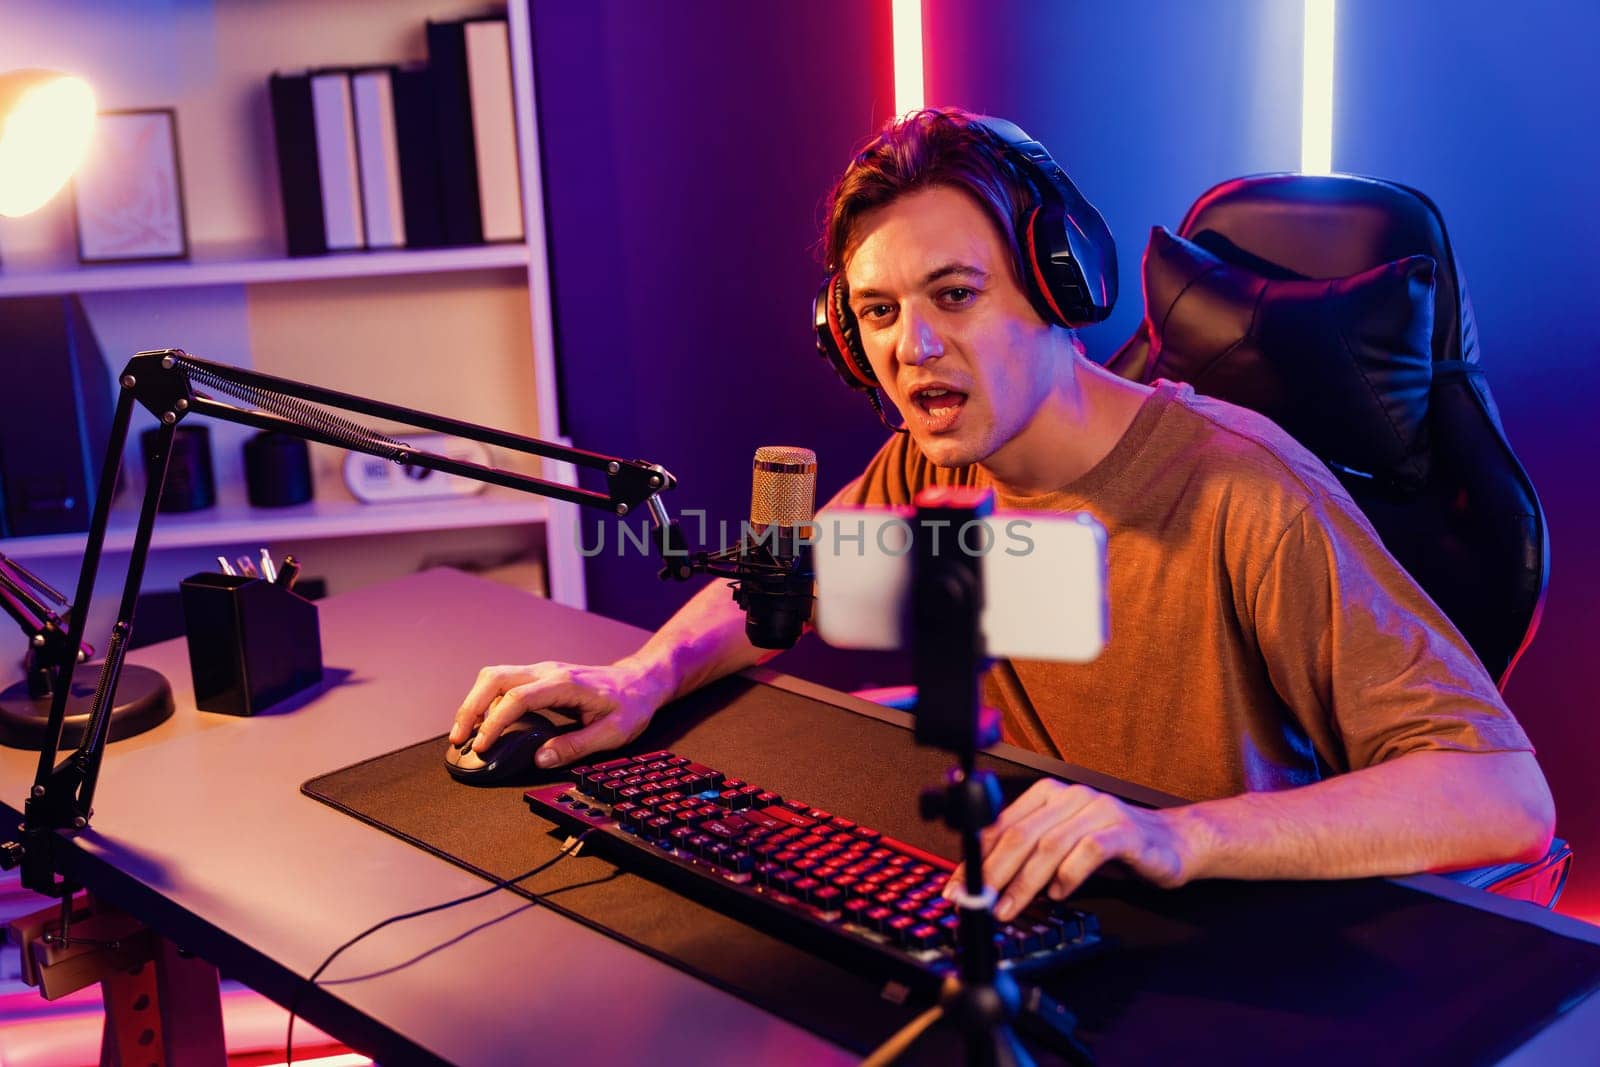 Host channel of gaming smart streamer playing online game, wearing headphone with viewers live steaming on media social online by smartphone talking with team player at neon lighting room. Pecuniary.